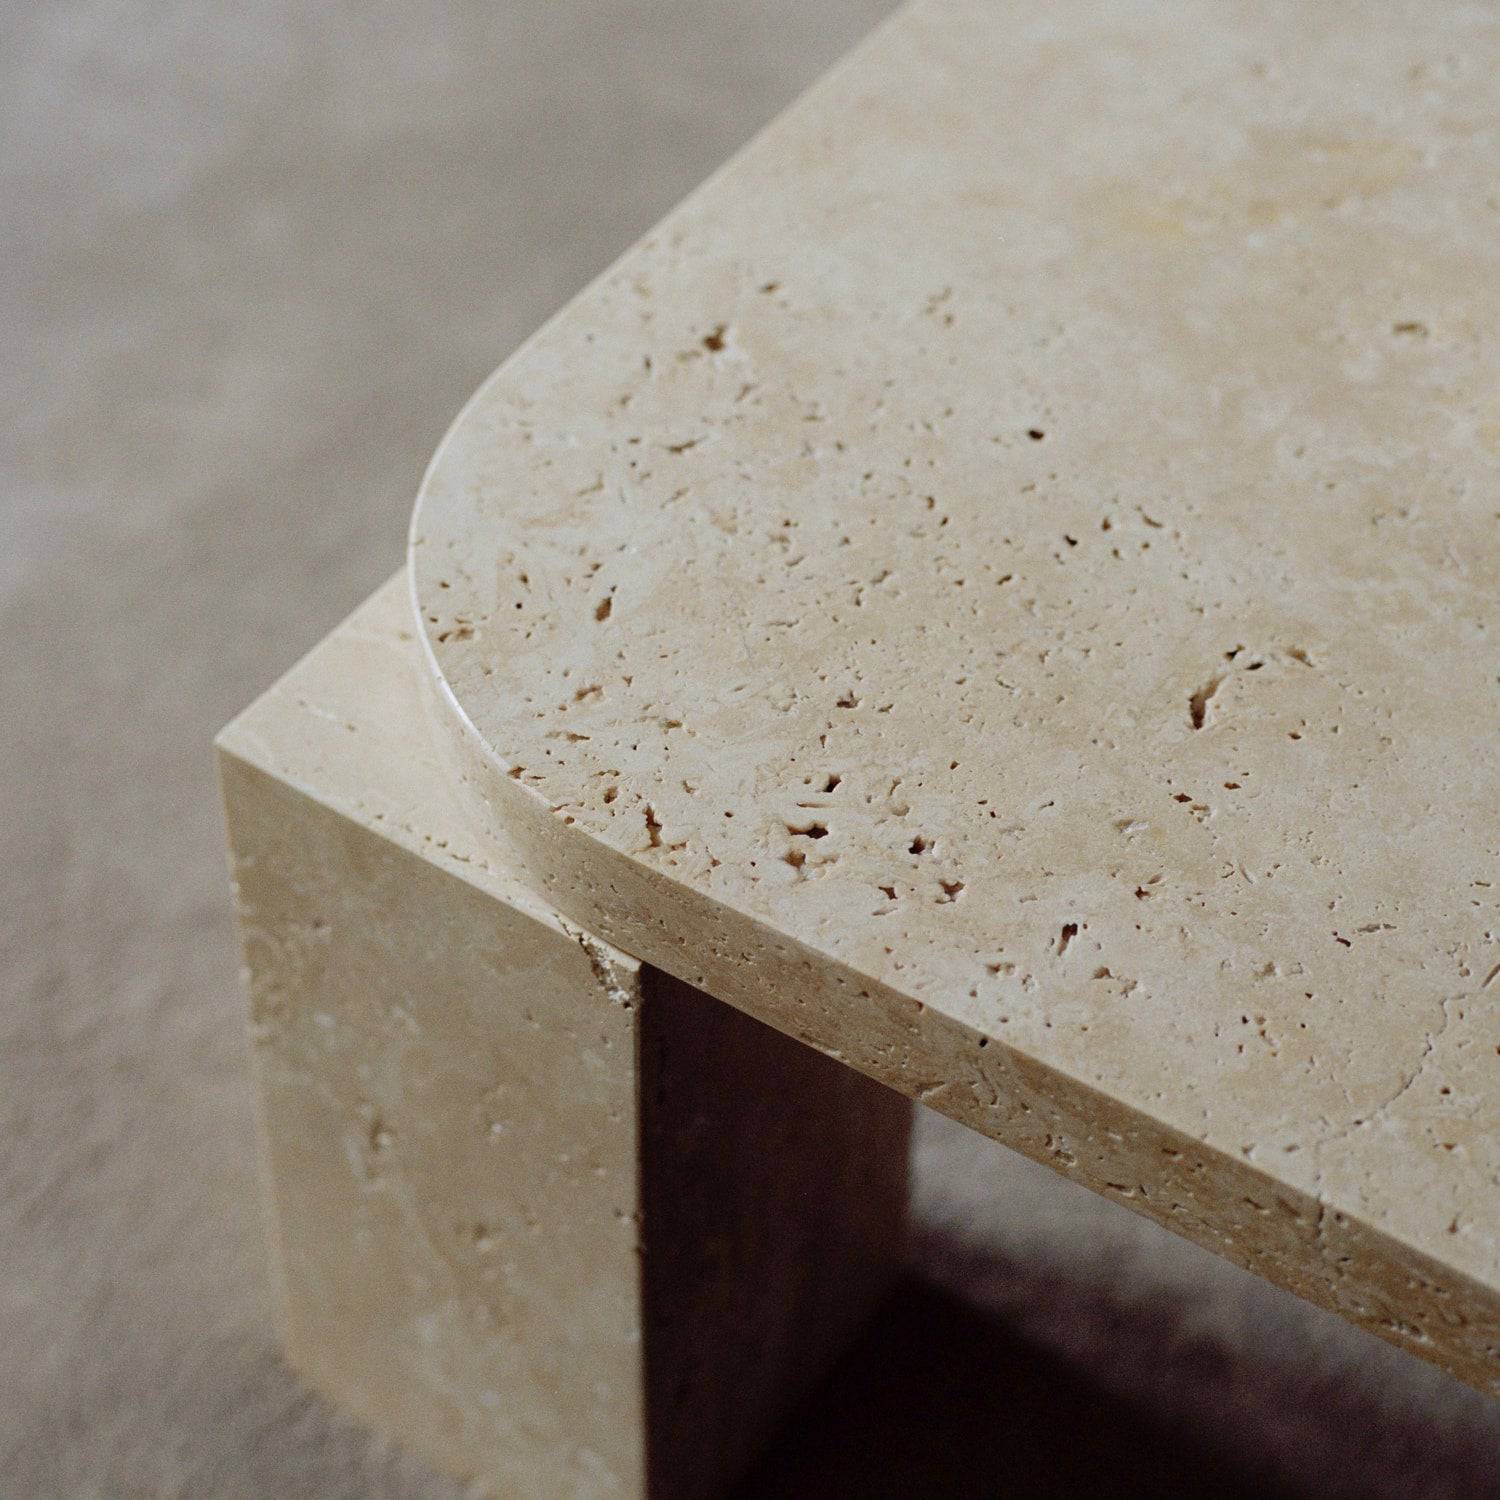 New Works Atlas Coffee Table Small Travertine - KANSO